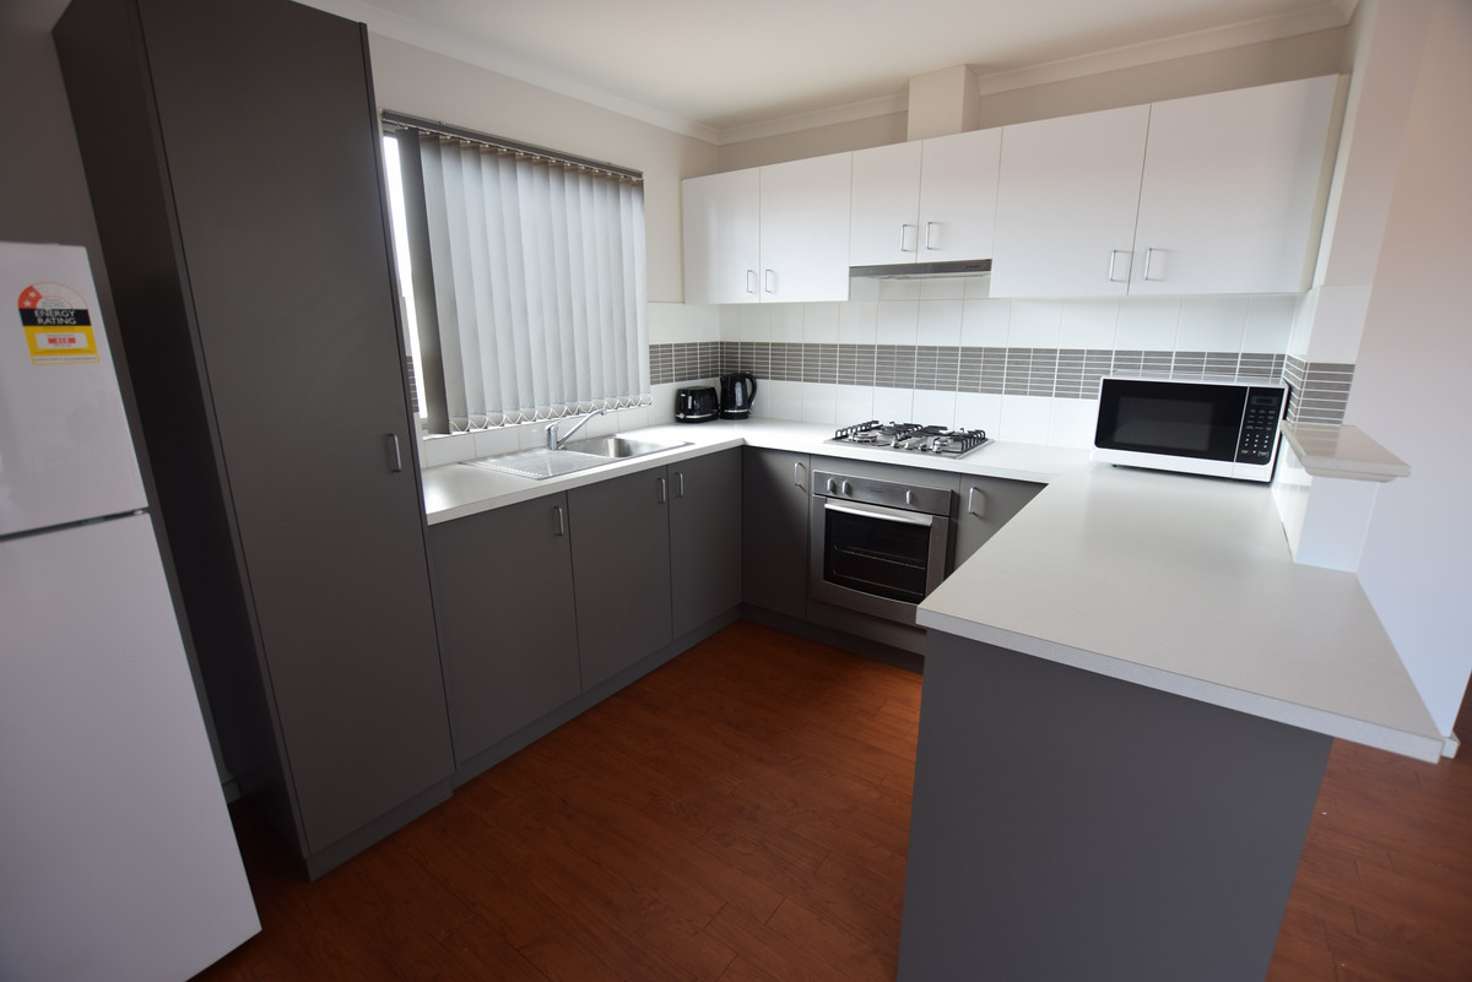 Main view of Homely apartment listing, 5/37 Morgans Street, Port Hedland WA 6721